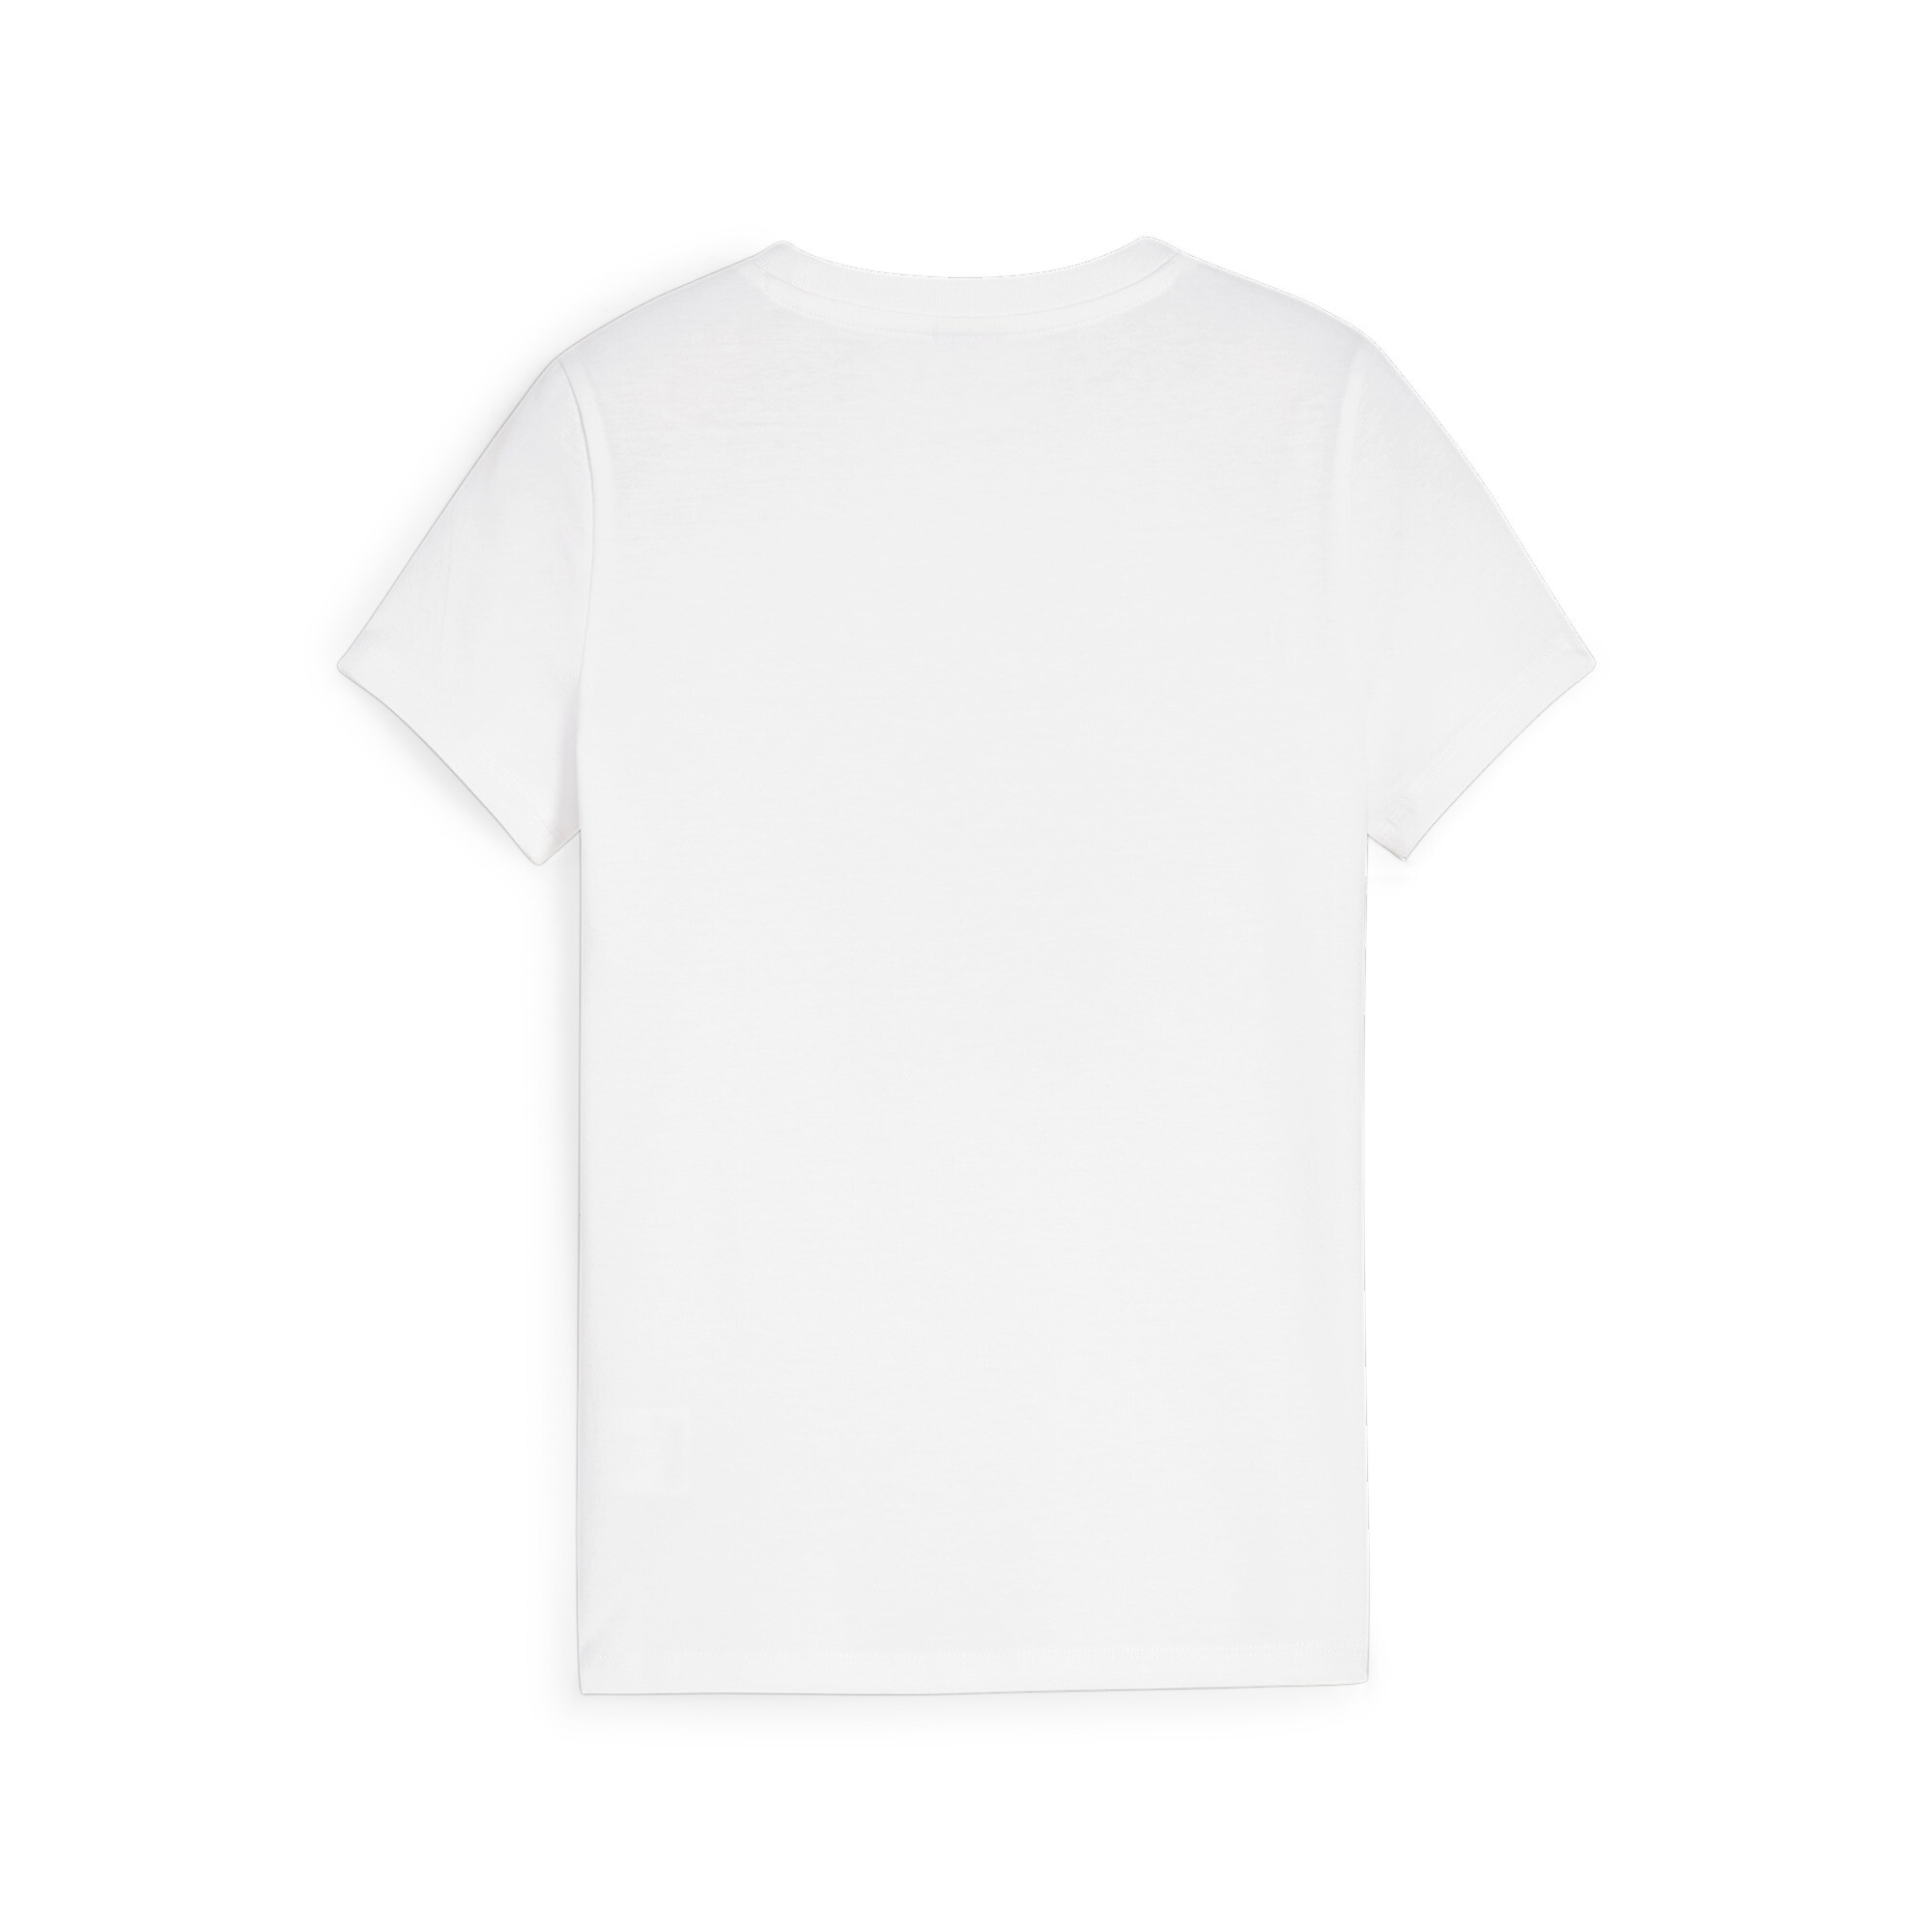 PUMA GRAPHICS MTCH PNT T-Shirt In White, Size 9-10 Youth